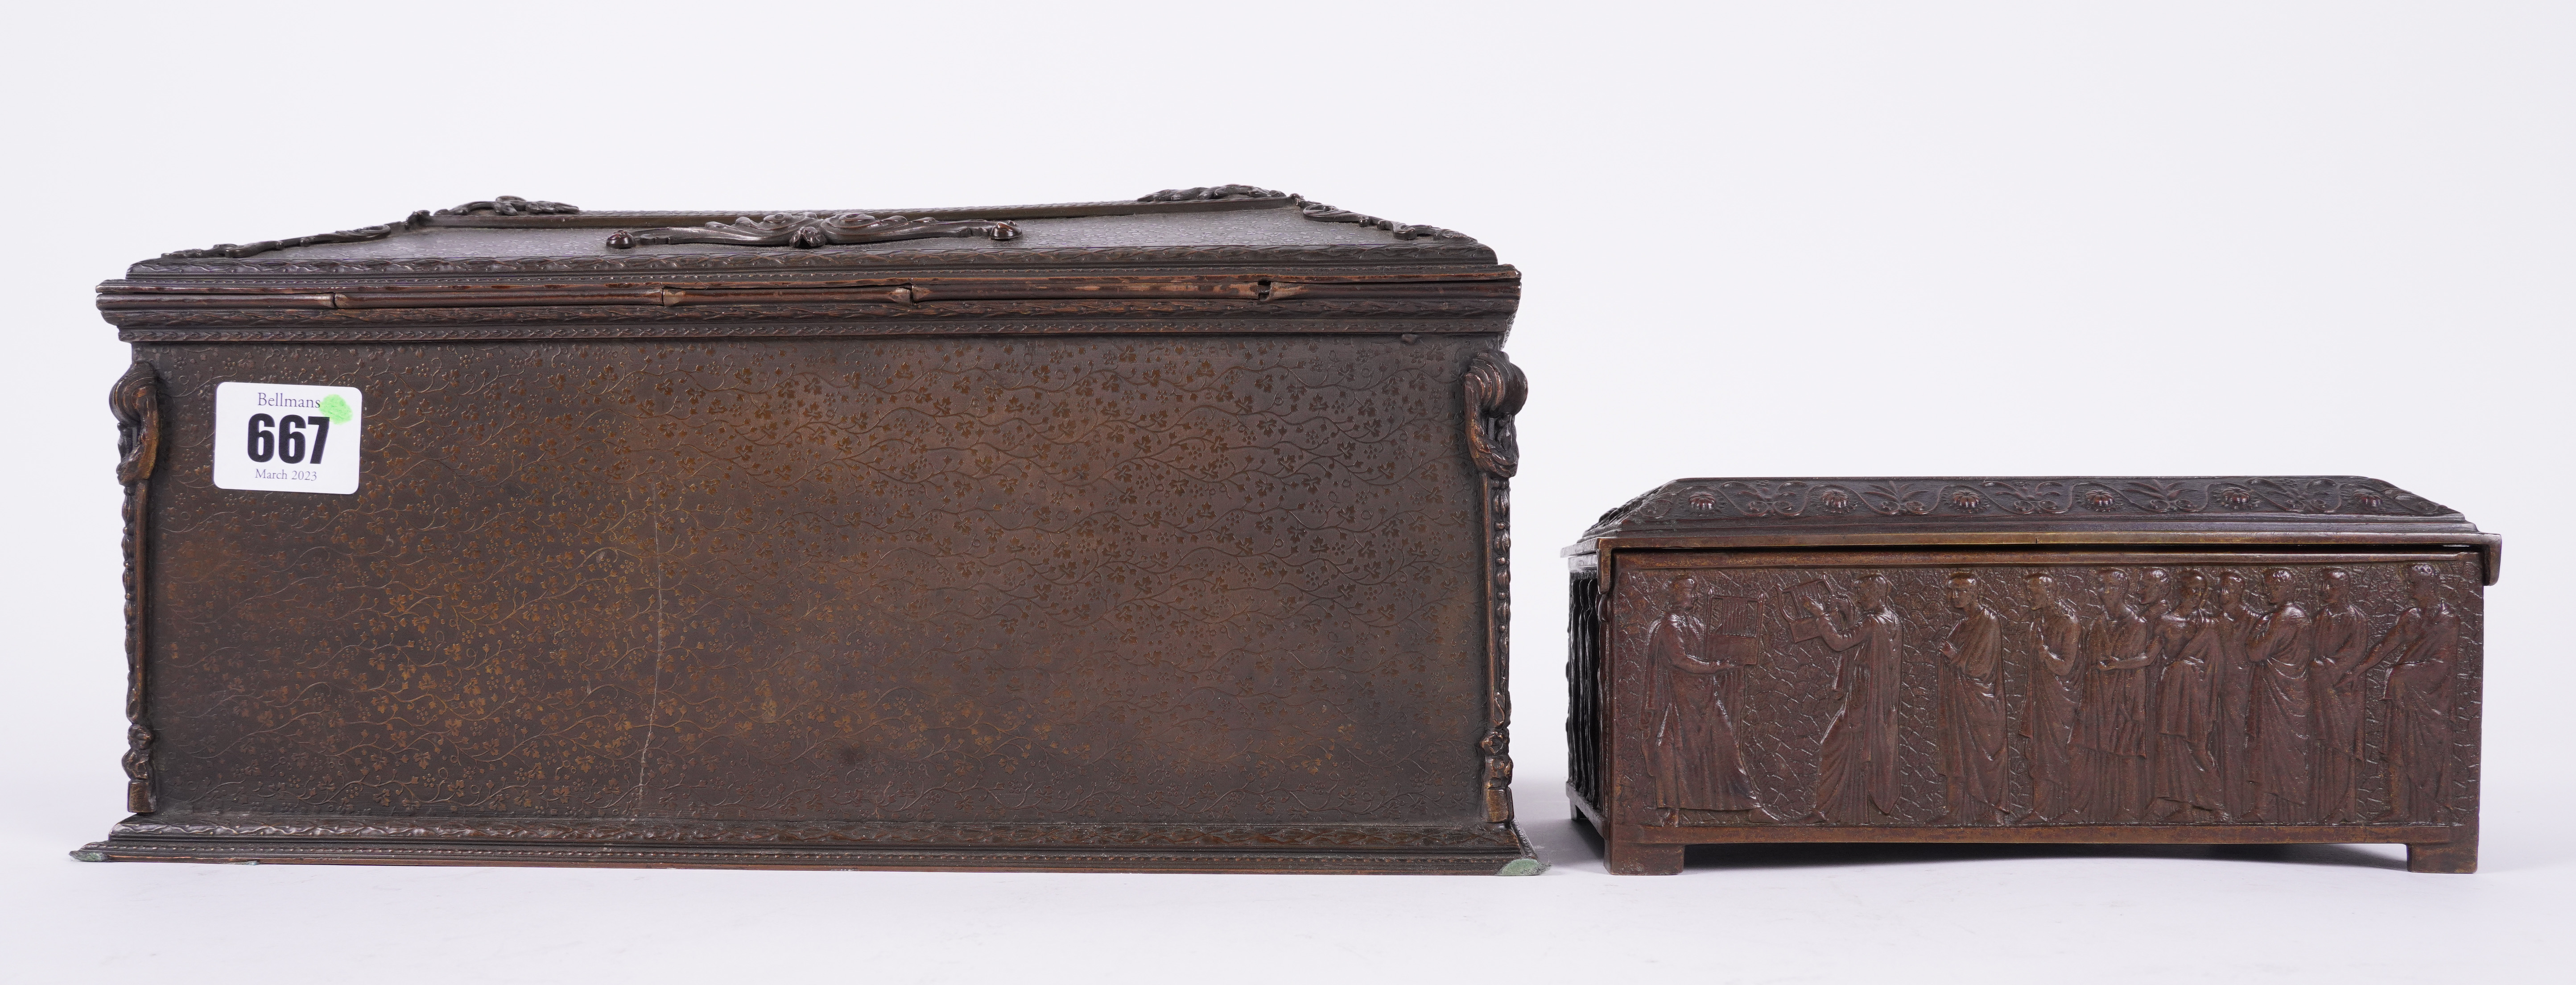 A FRENCH BRASS TABLE CASKET AND A SMALL BRONZE PATINATED BOX (6) - Image 8 of 9